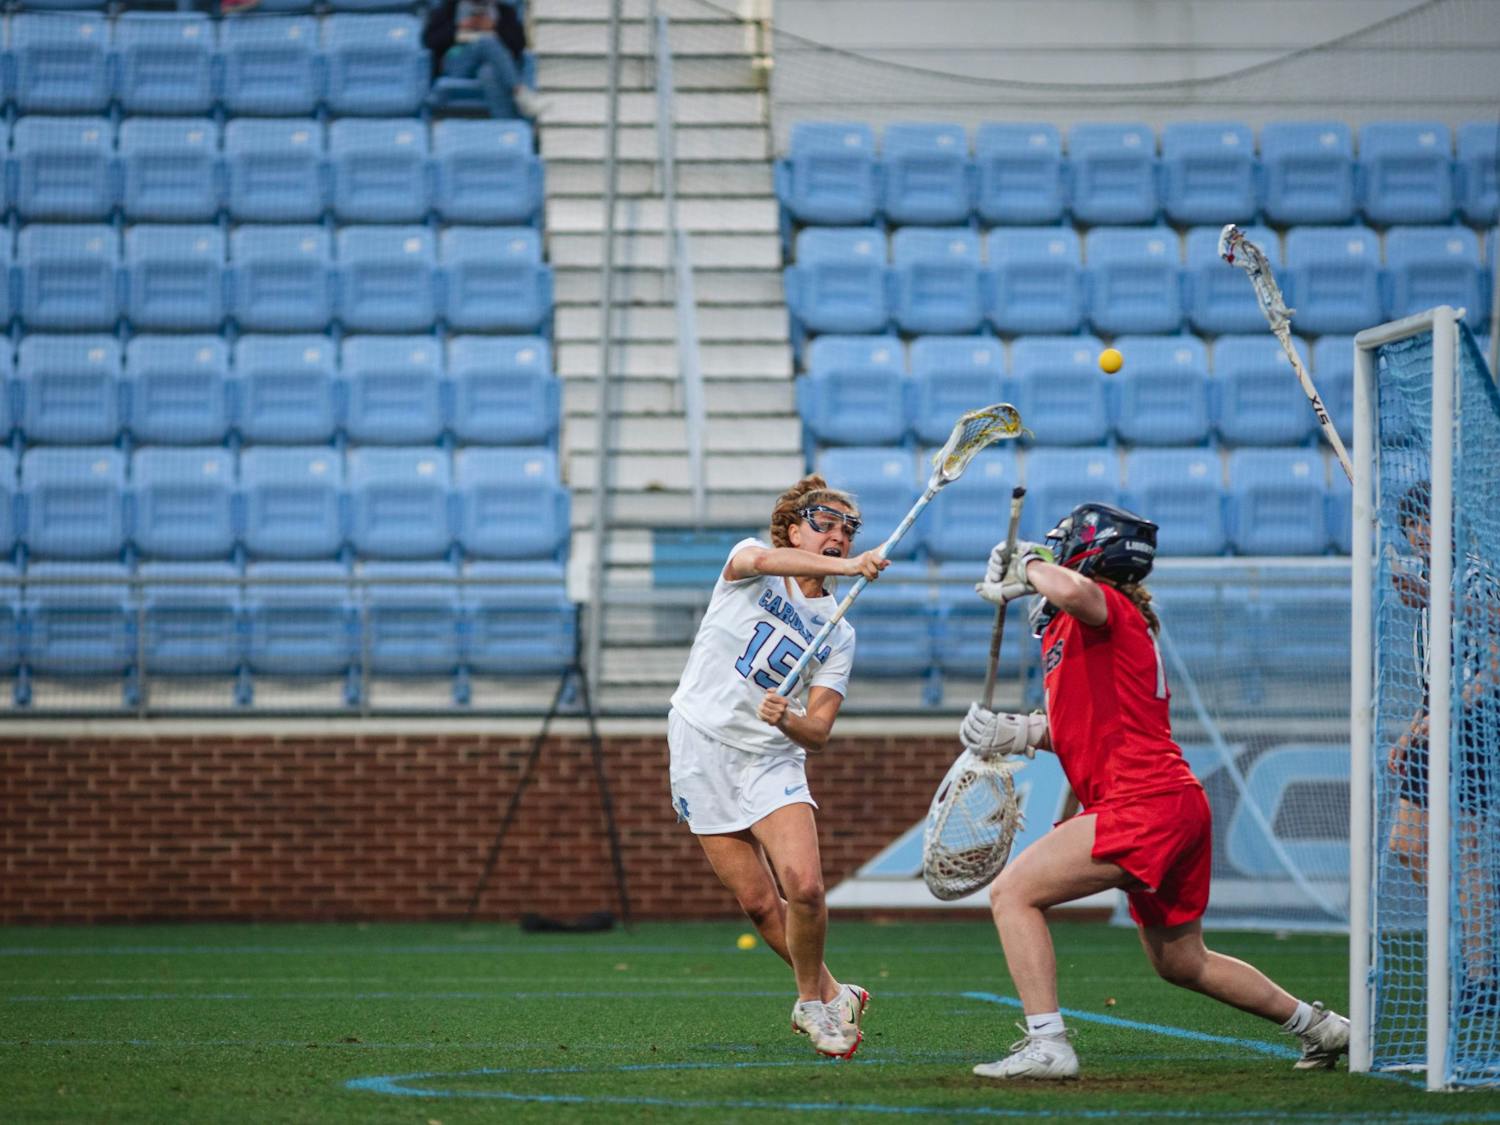 UNC junior attacker Caitlyn Wurzburger (15) scores during the women's lacrosse game against Liberty on Wednesday, Feb. 15, 2023, at Dorrance Field. UNC beat Liberty 18-6.